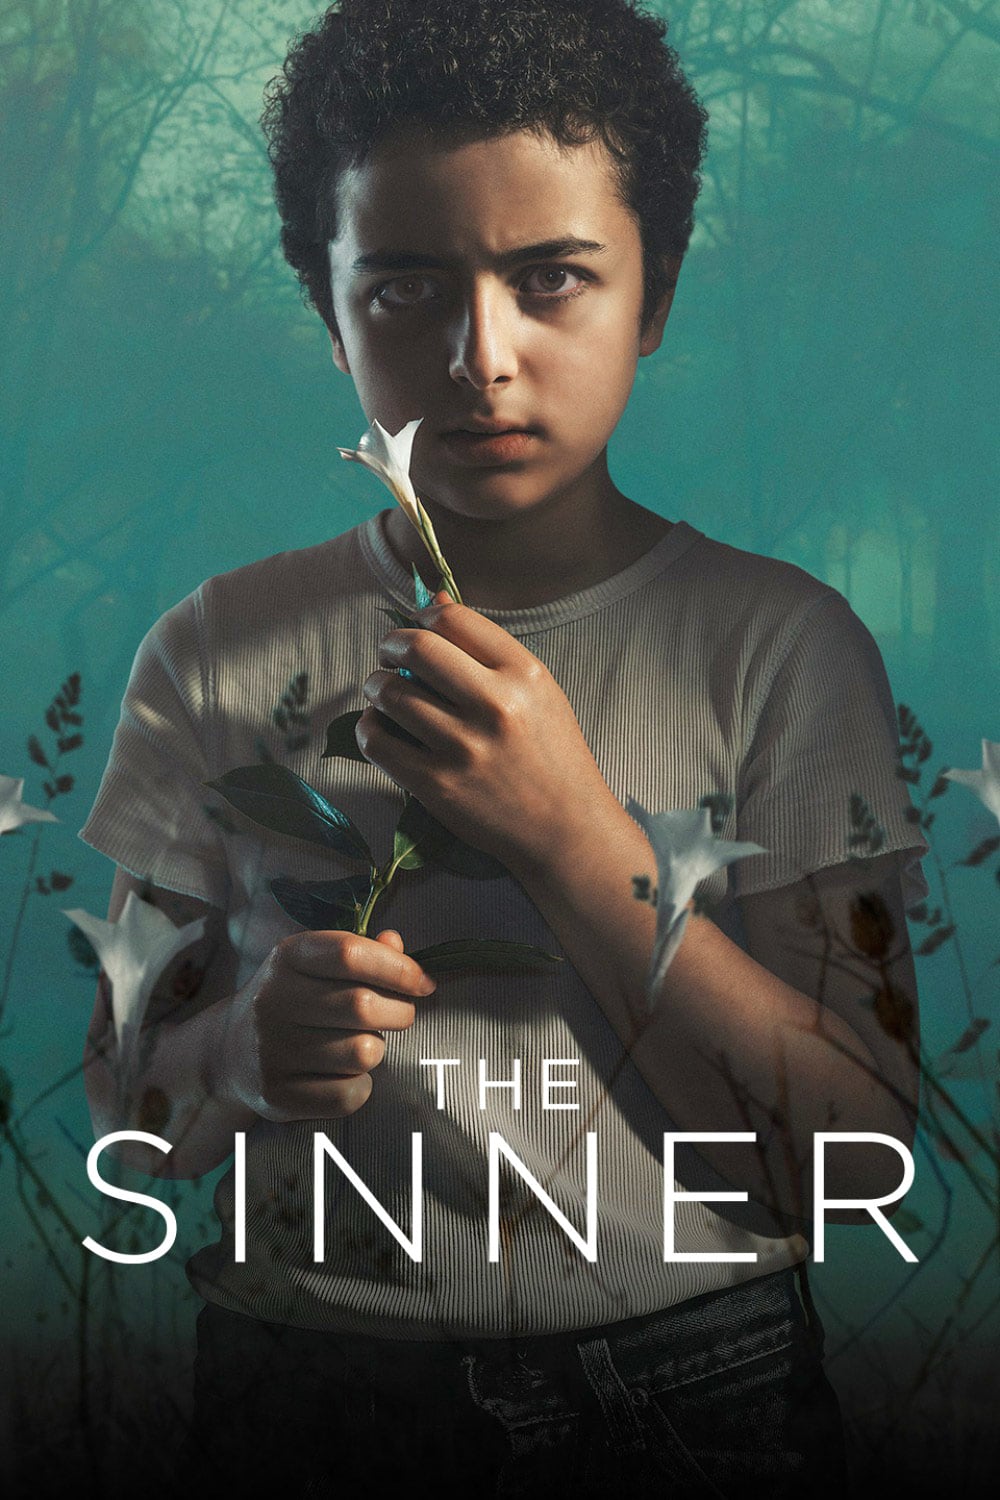 The Sinner Picture